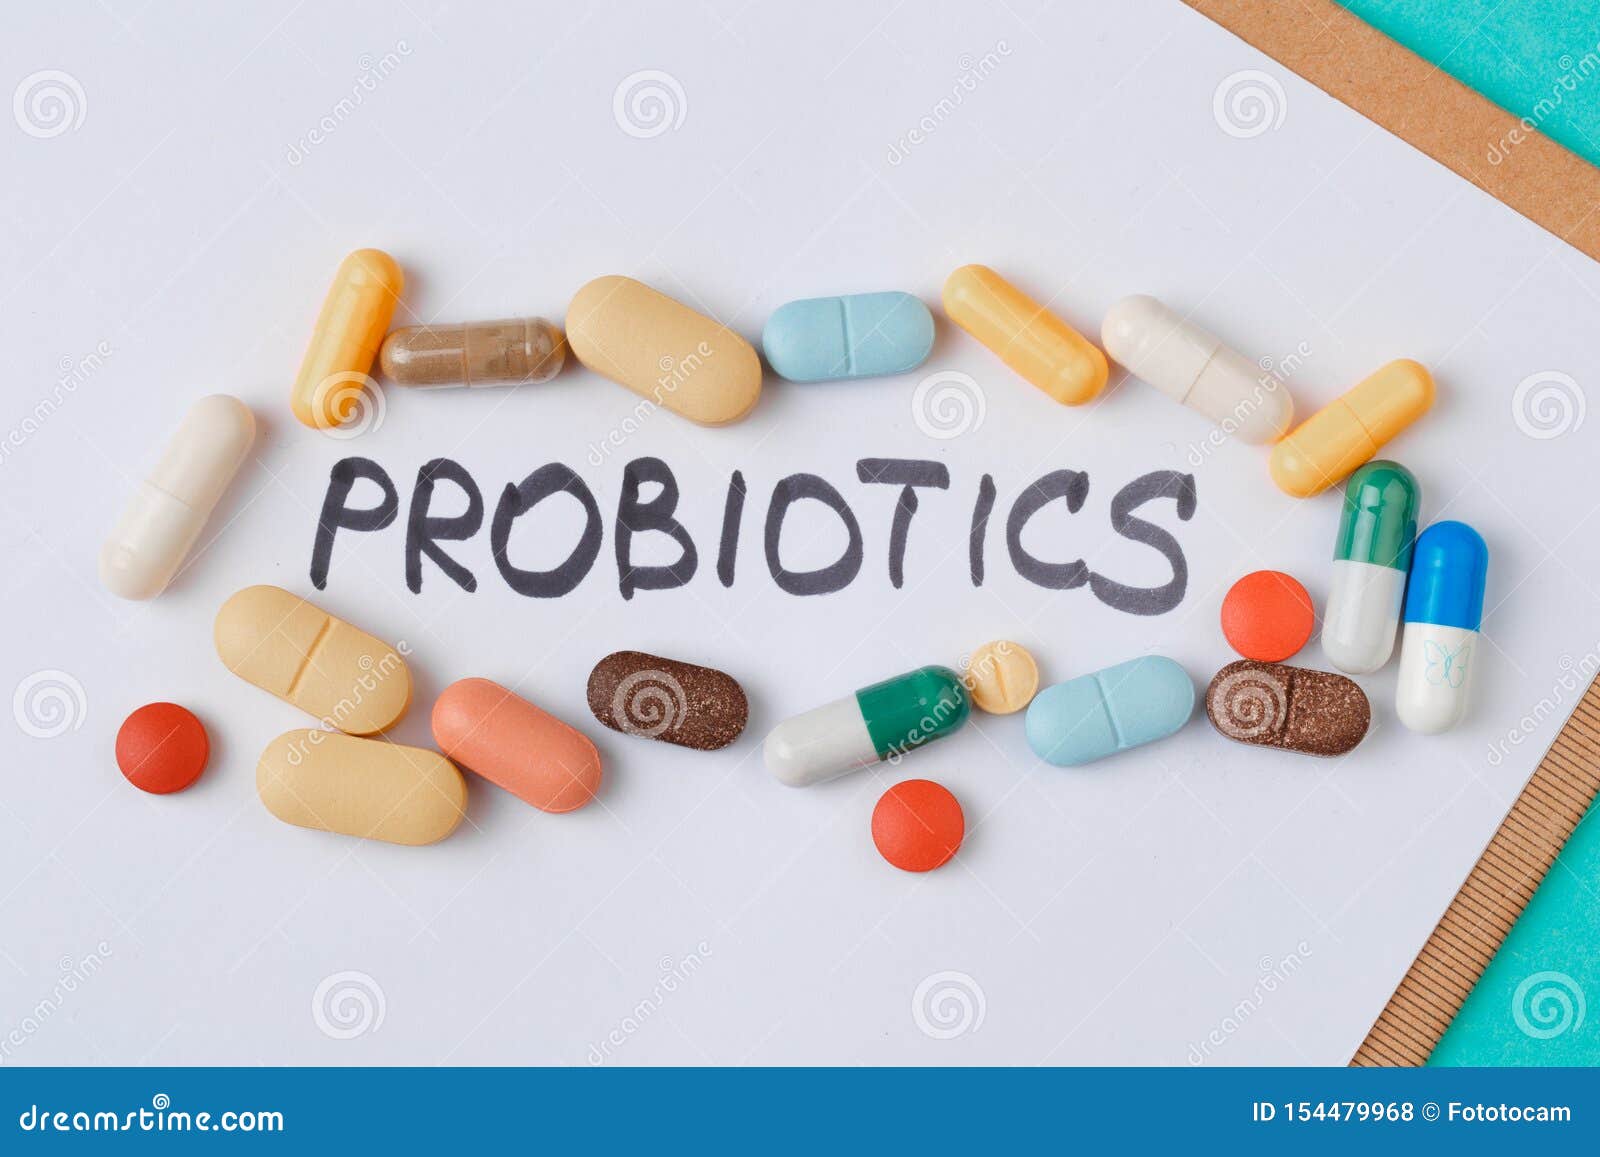 colour tablets and pills on blue background probiotic theme  - image